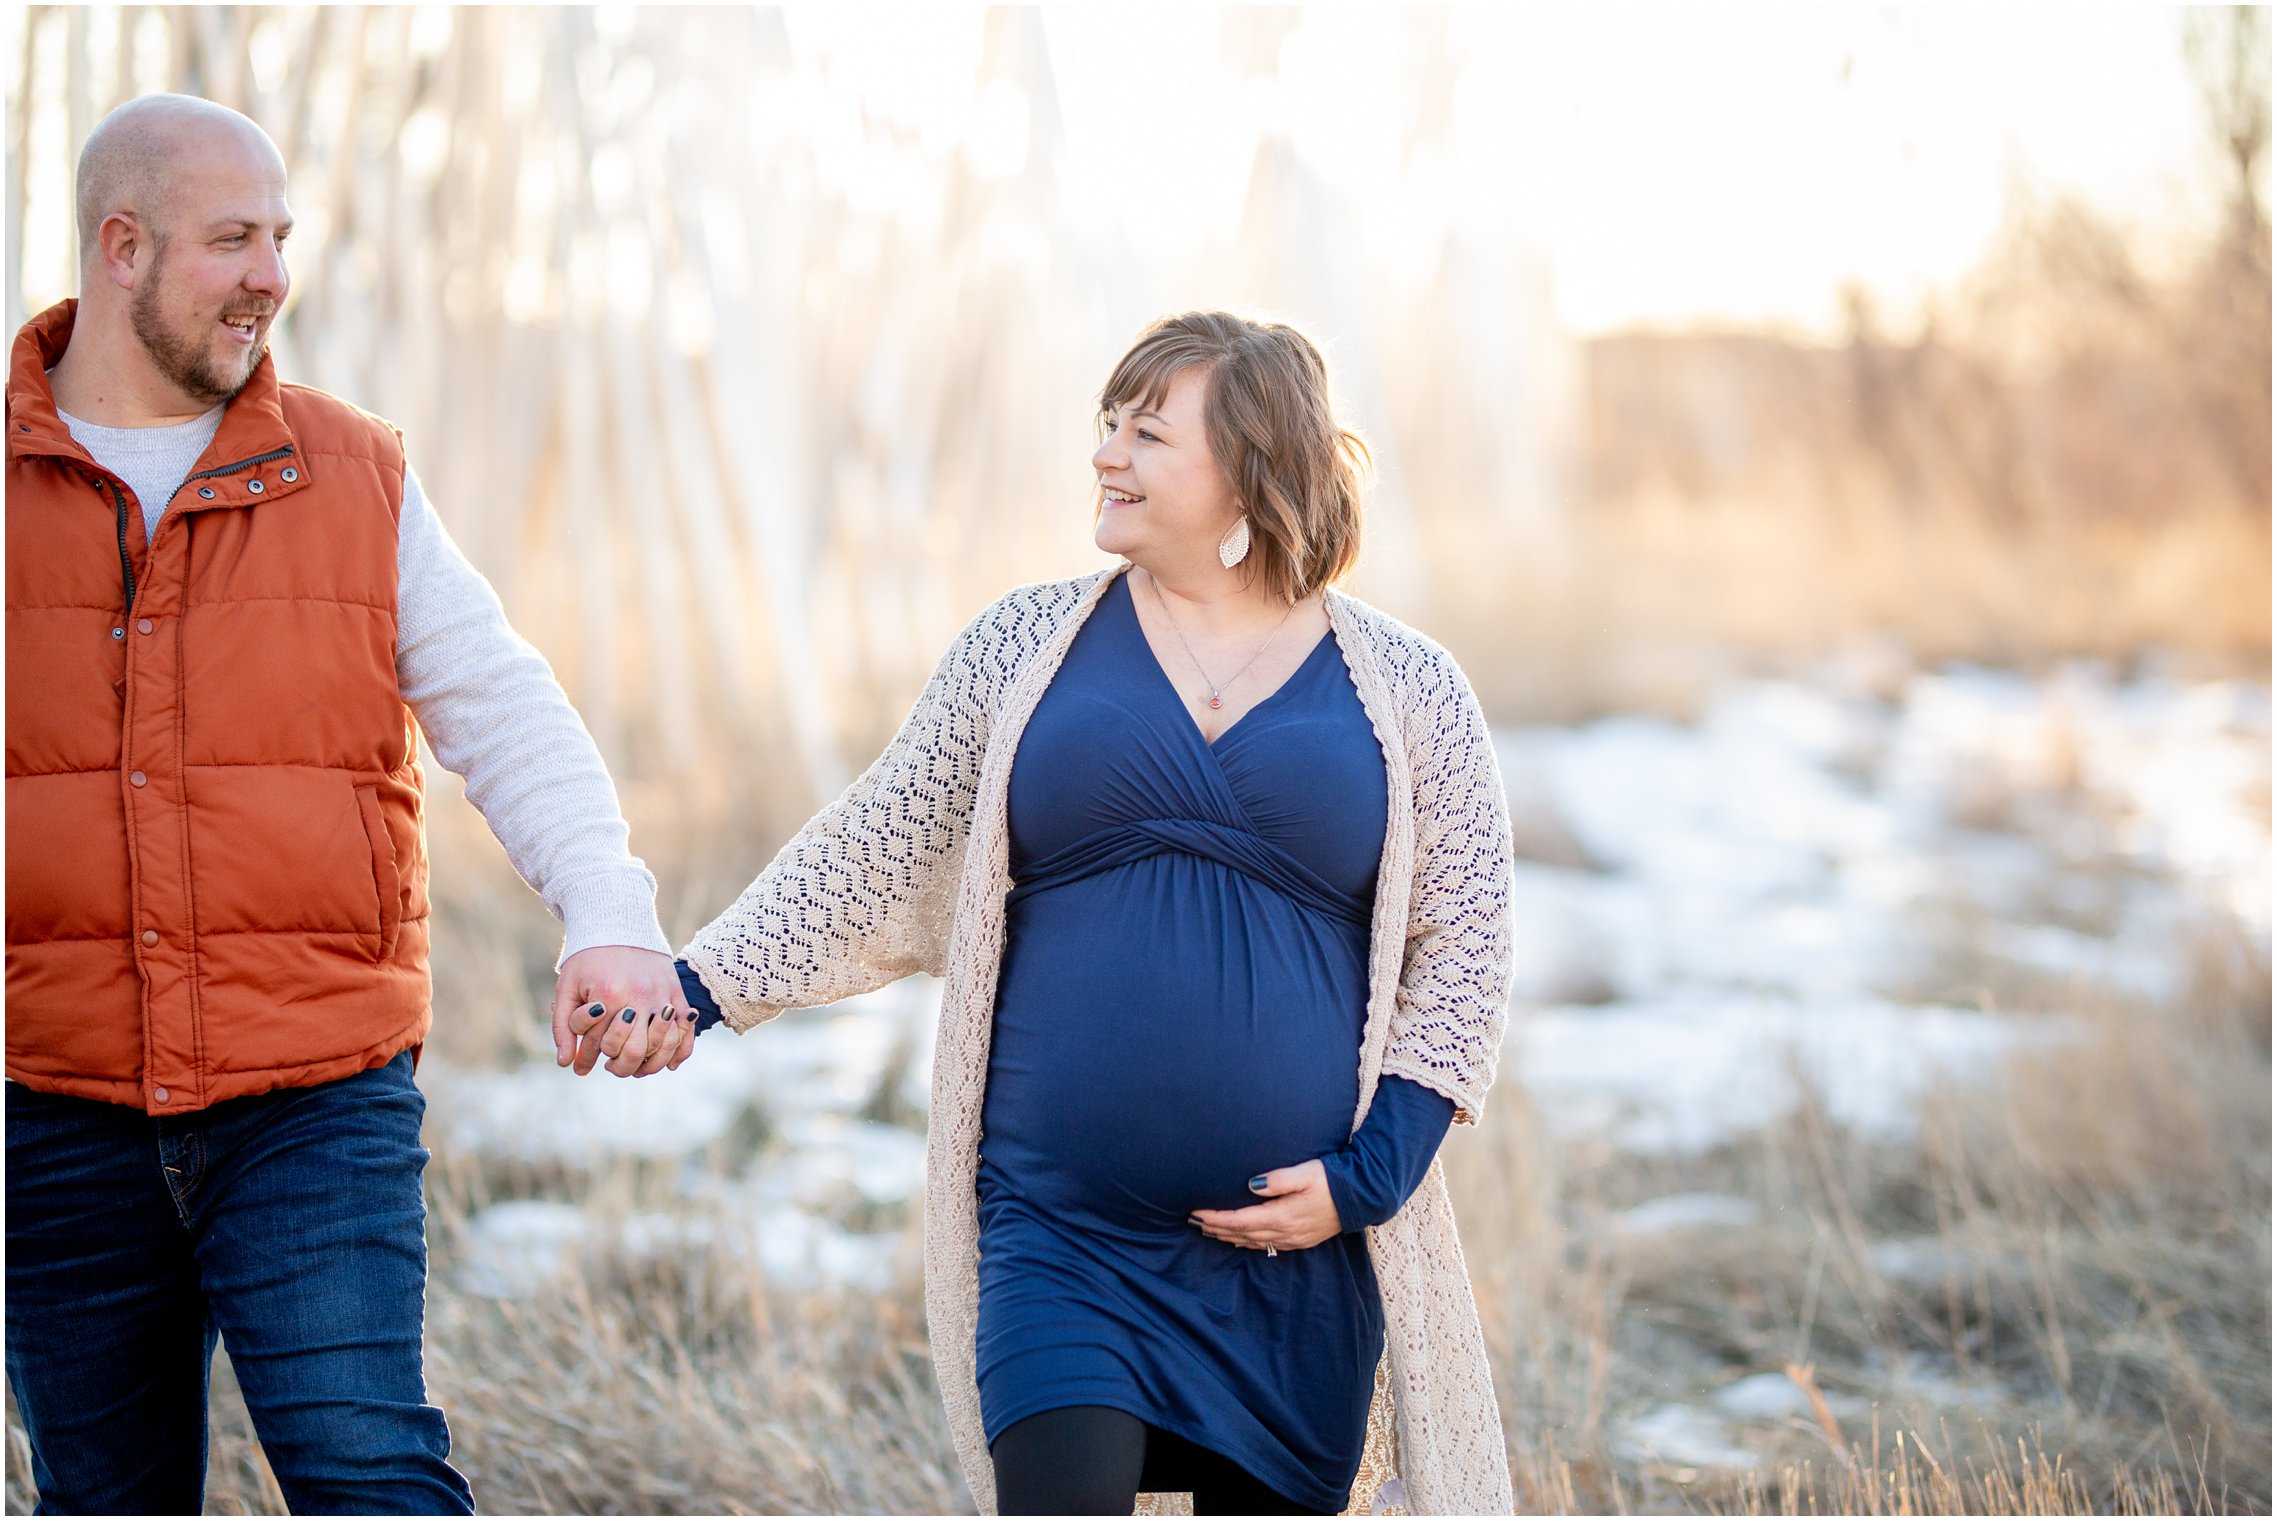 Golden light maternity session in Greeley, Colorado photographed by Sioux City Materntiy Photographer